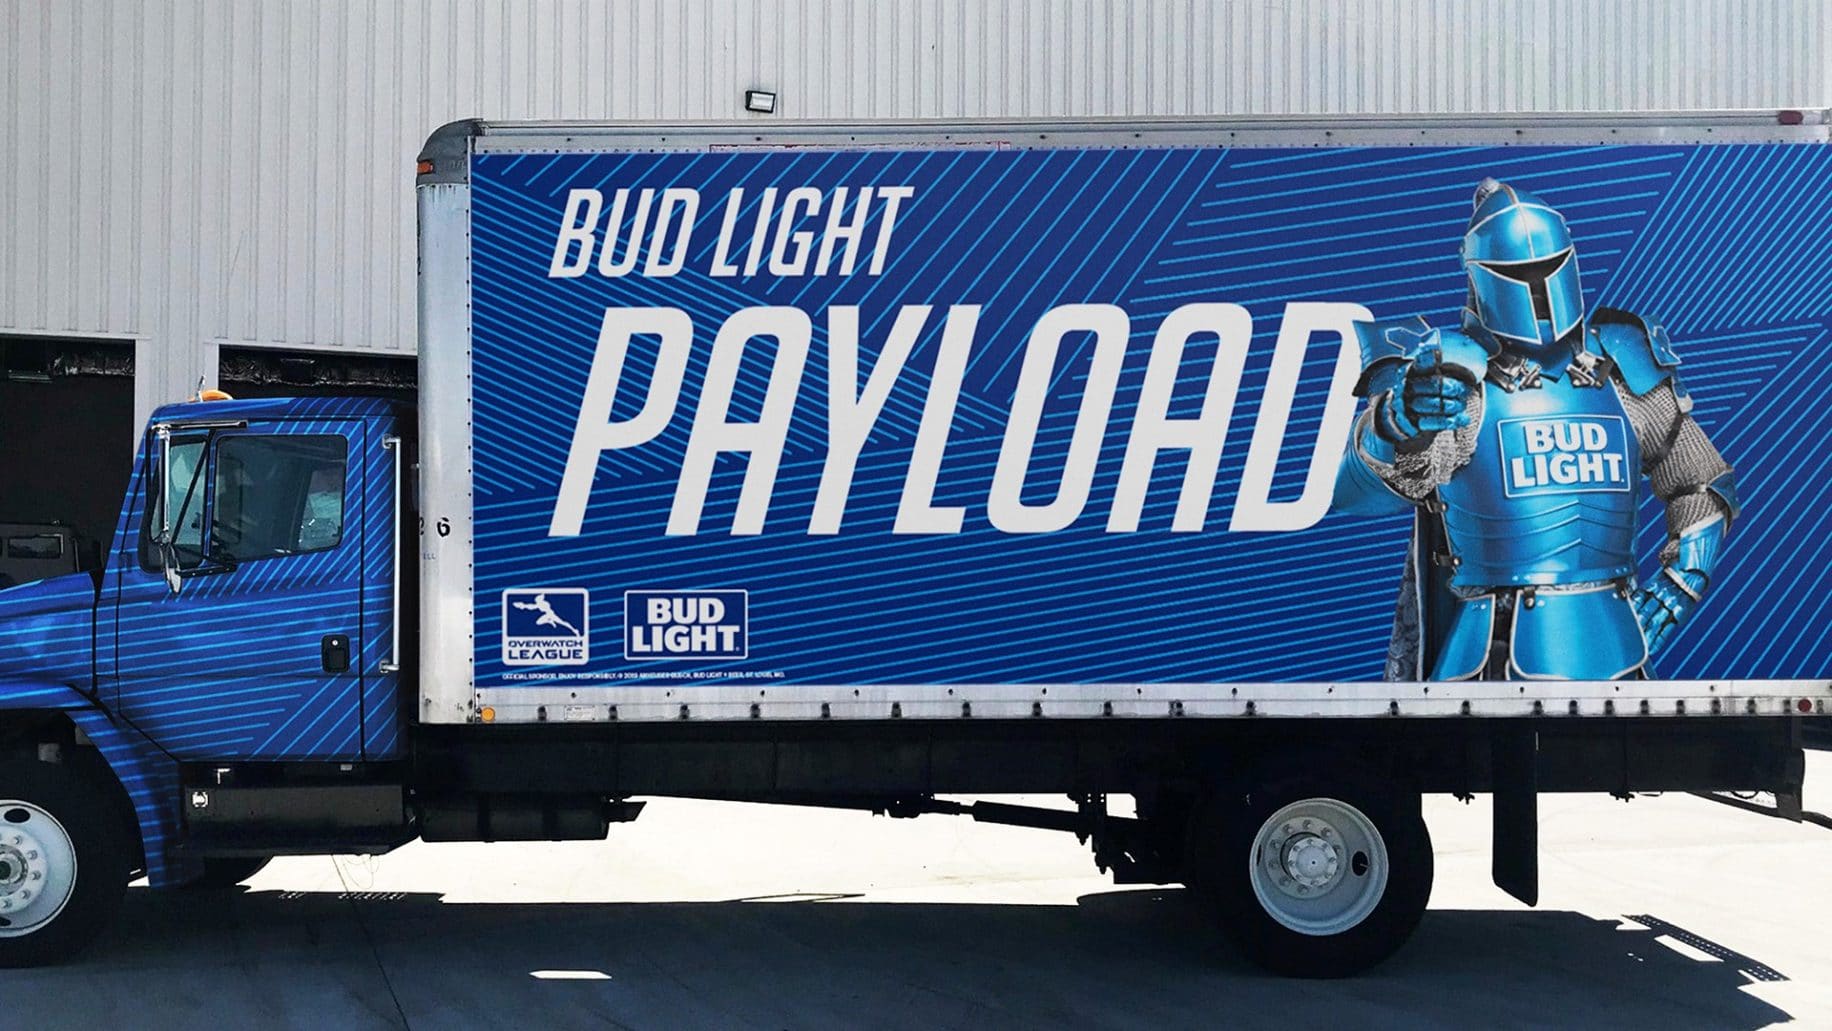 Bud Light Bringing “Payload Truck” to Wells Fargo Center This Weekend